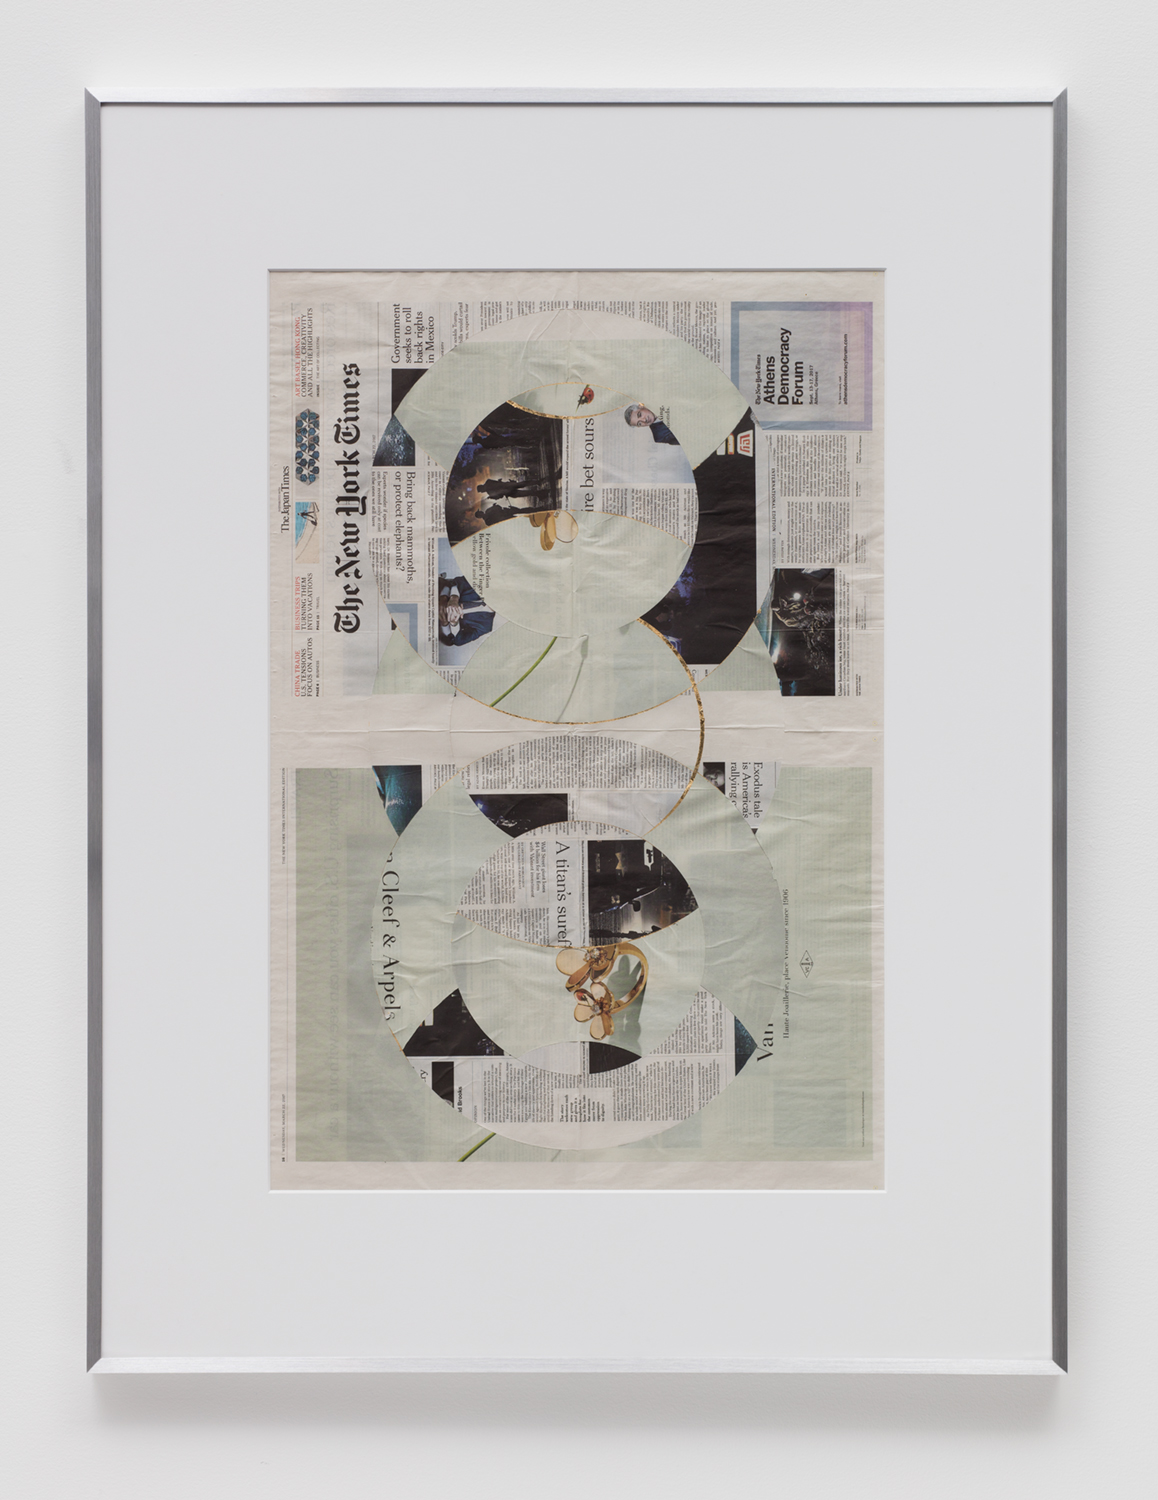   Blind Collage (Two 180º Rotations, The New York Times International Edition Distributed with The Japan Times, Wednesday, March 22, 2017)   2017  Newspaper, tape, and 22 karat gold leaf  43 5/8 x 33 1/8 inches   Blind Collages, 2017–   Exhibition:  